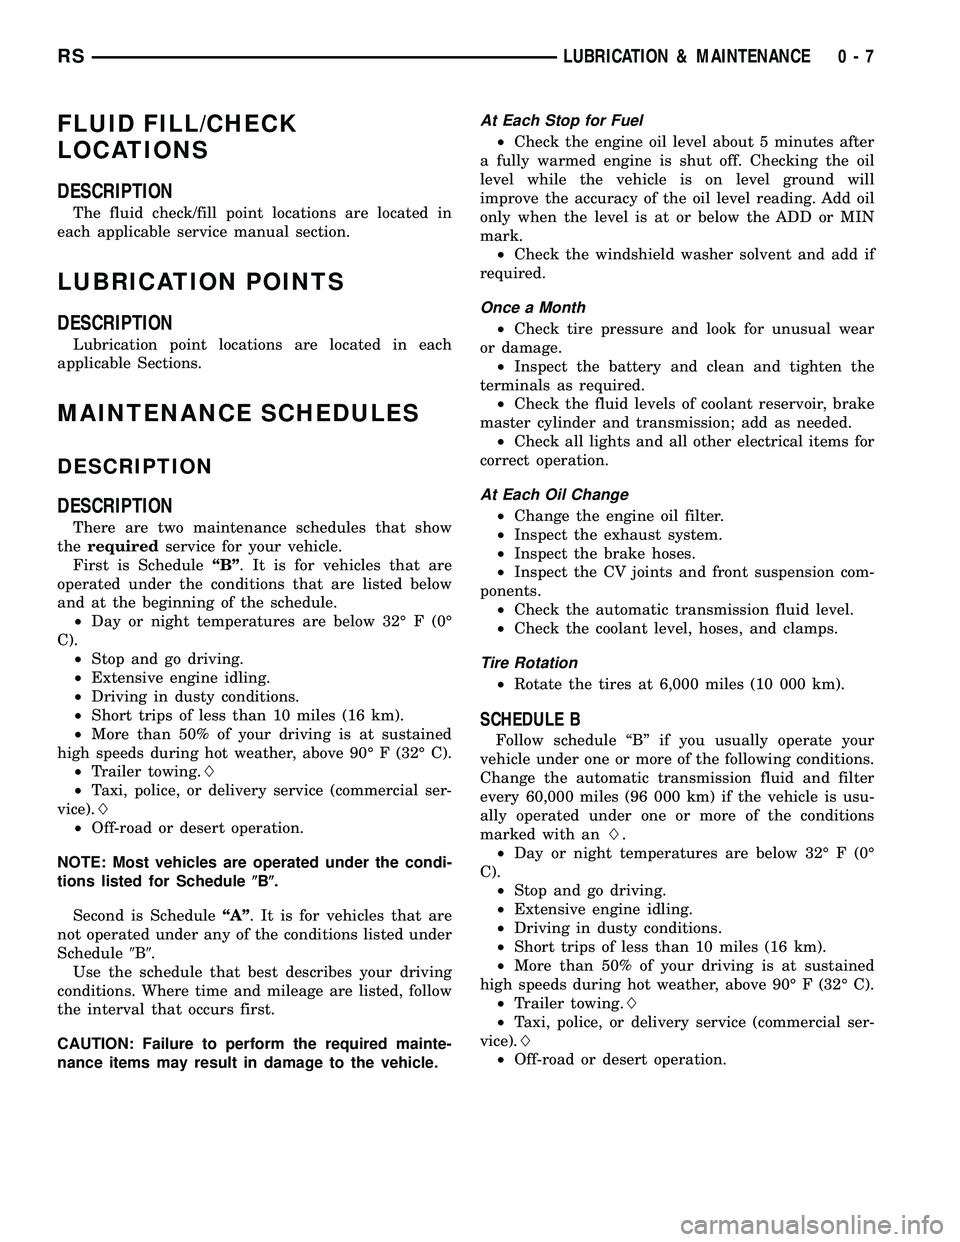 CHRYSLER VOYAGER 2004  Service Manual FLUID FILL/CHECK
LOCATIONS
DESCRIPTION
The fluid check/fill point locations are located in
each applicable service manual section.
LUBRICATION POINTS
DESCRIPTION
Lubrication point locations are locate